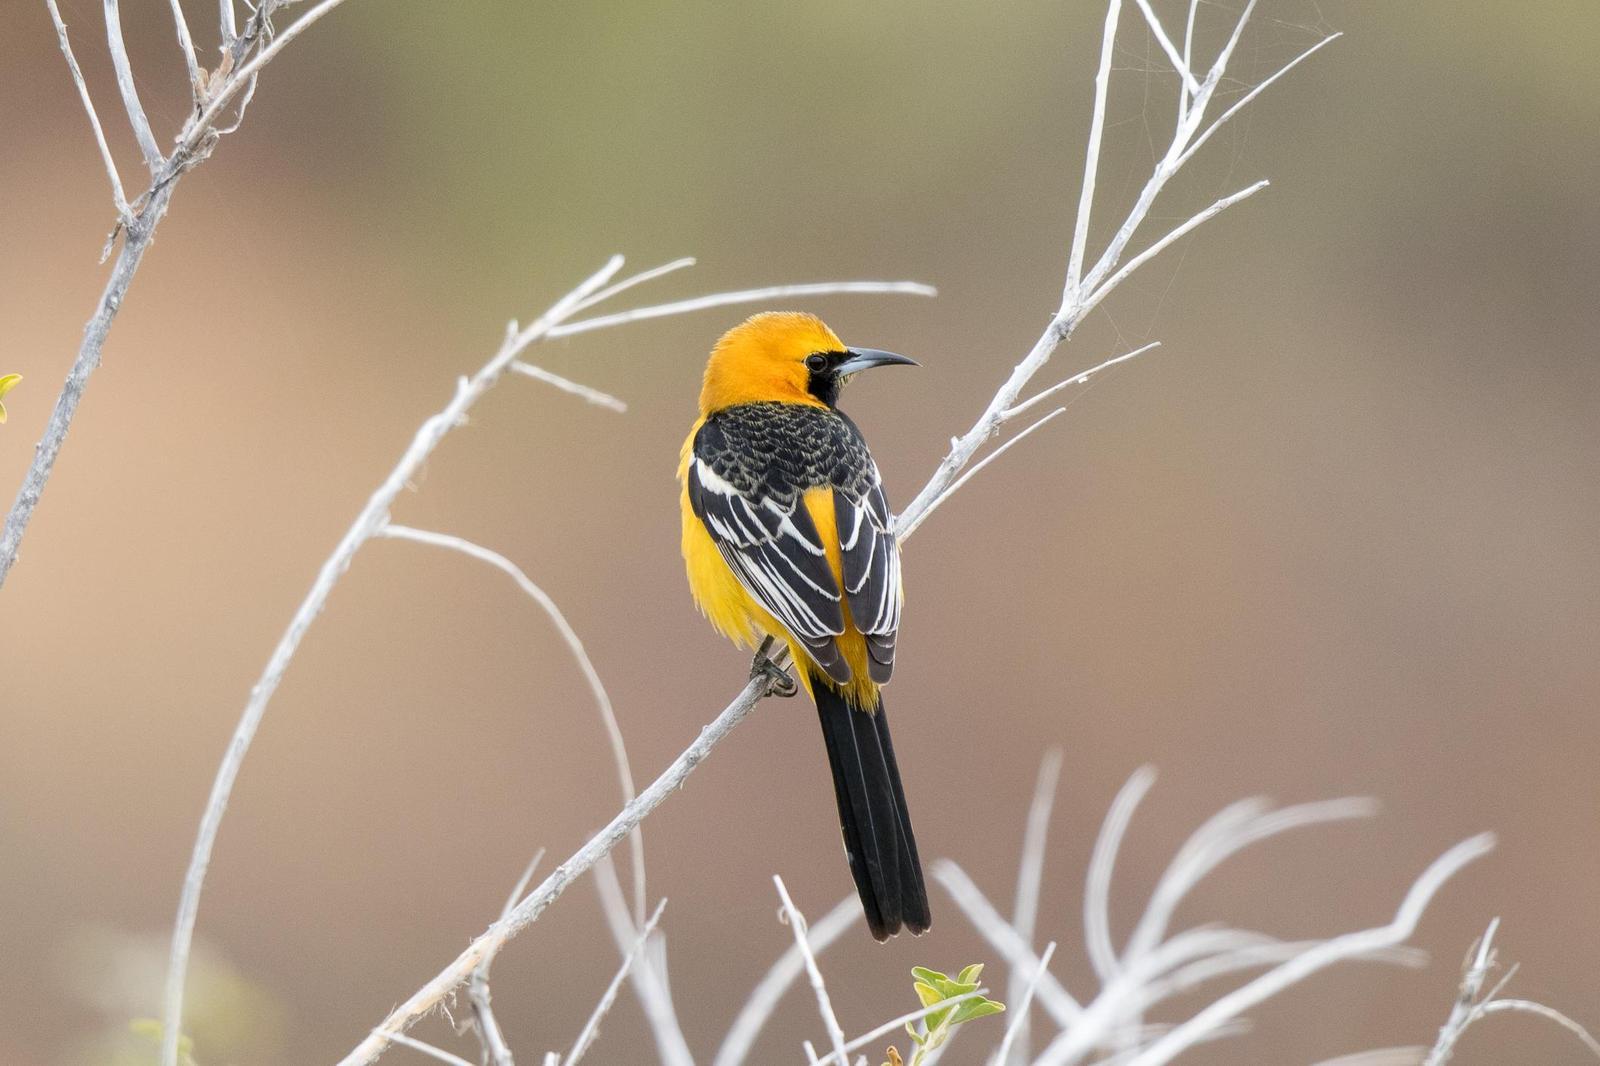 Hooded Oriole Photo by Morgan Edwards